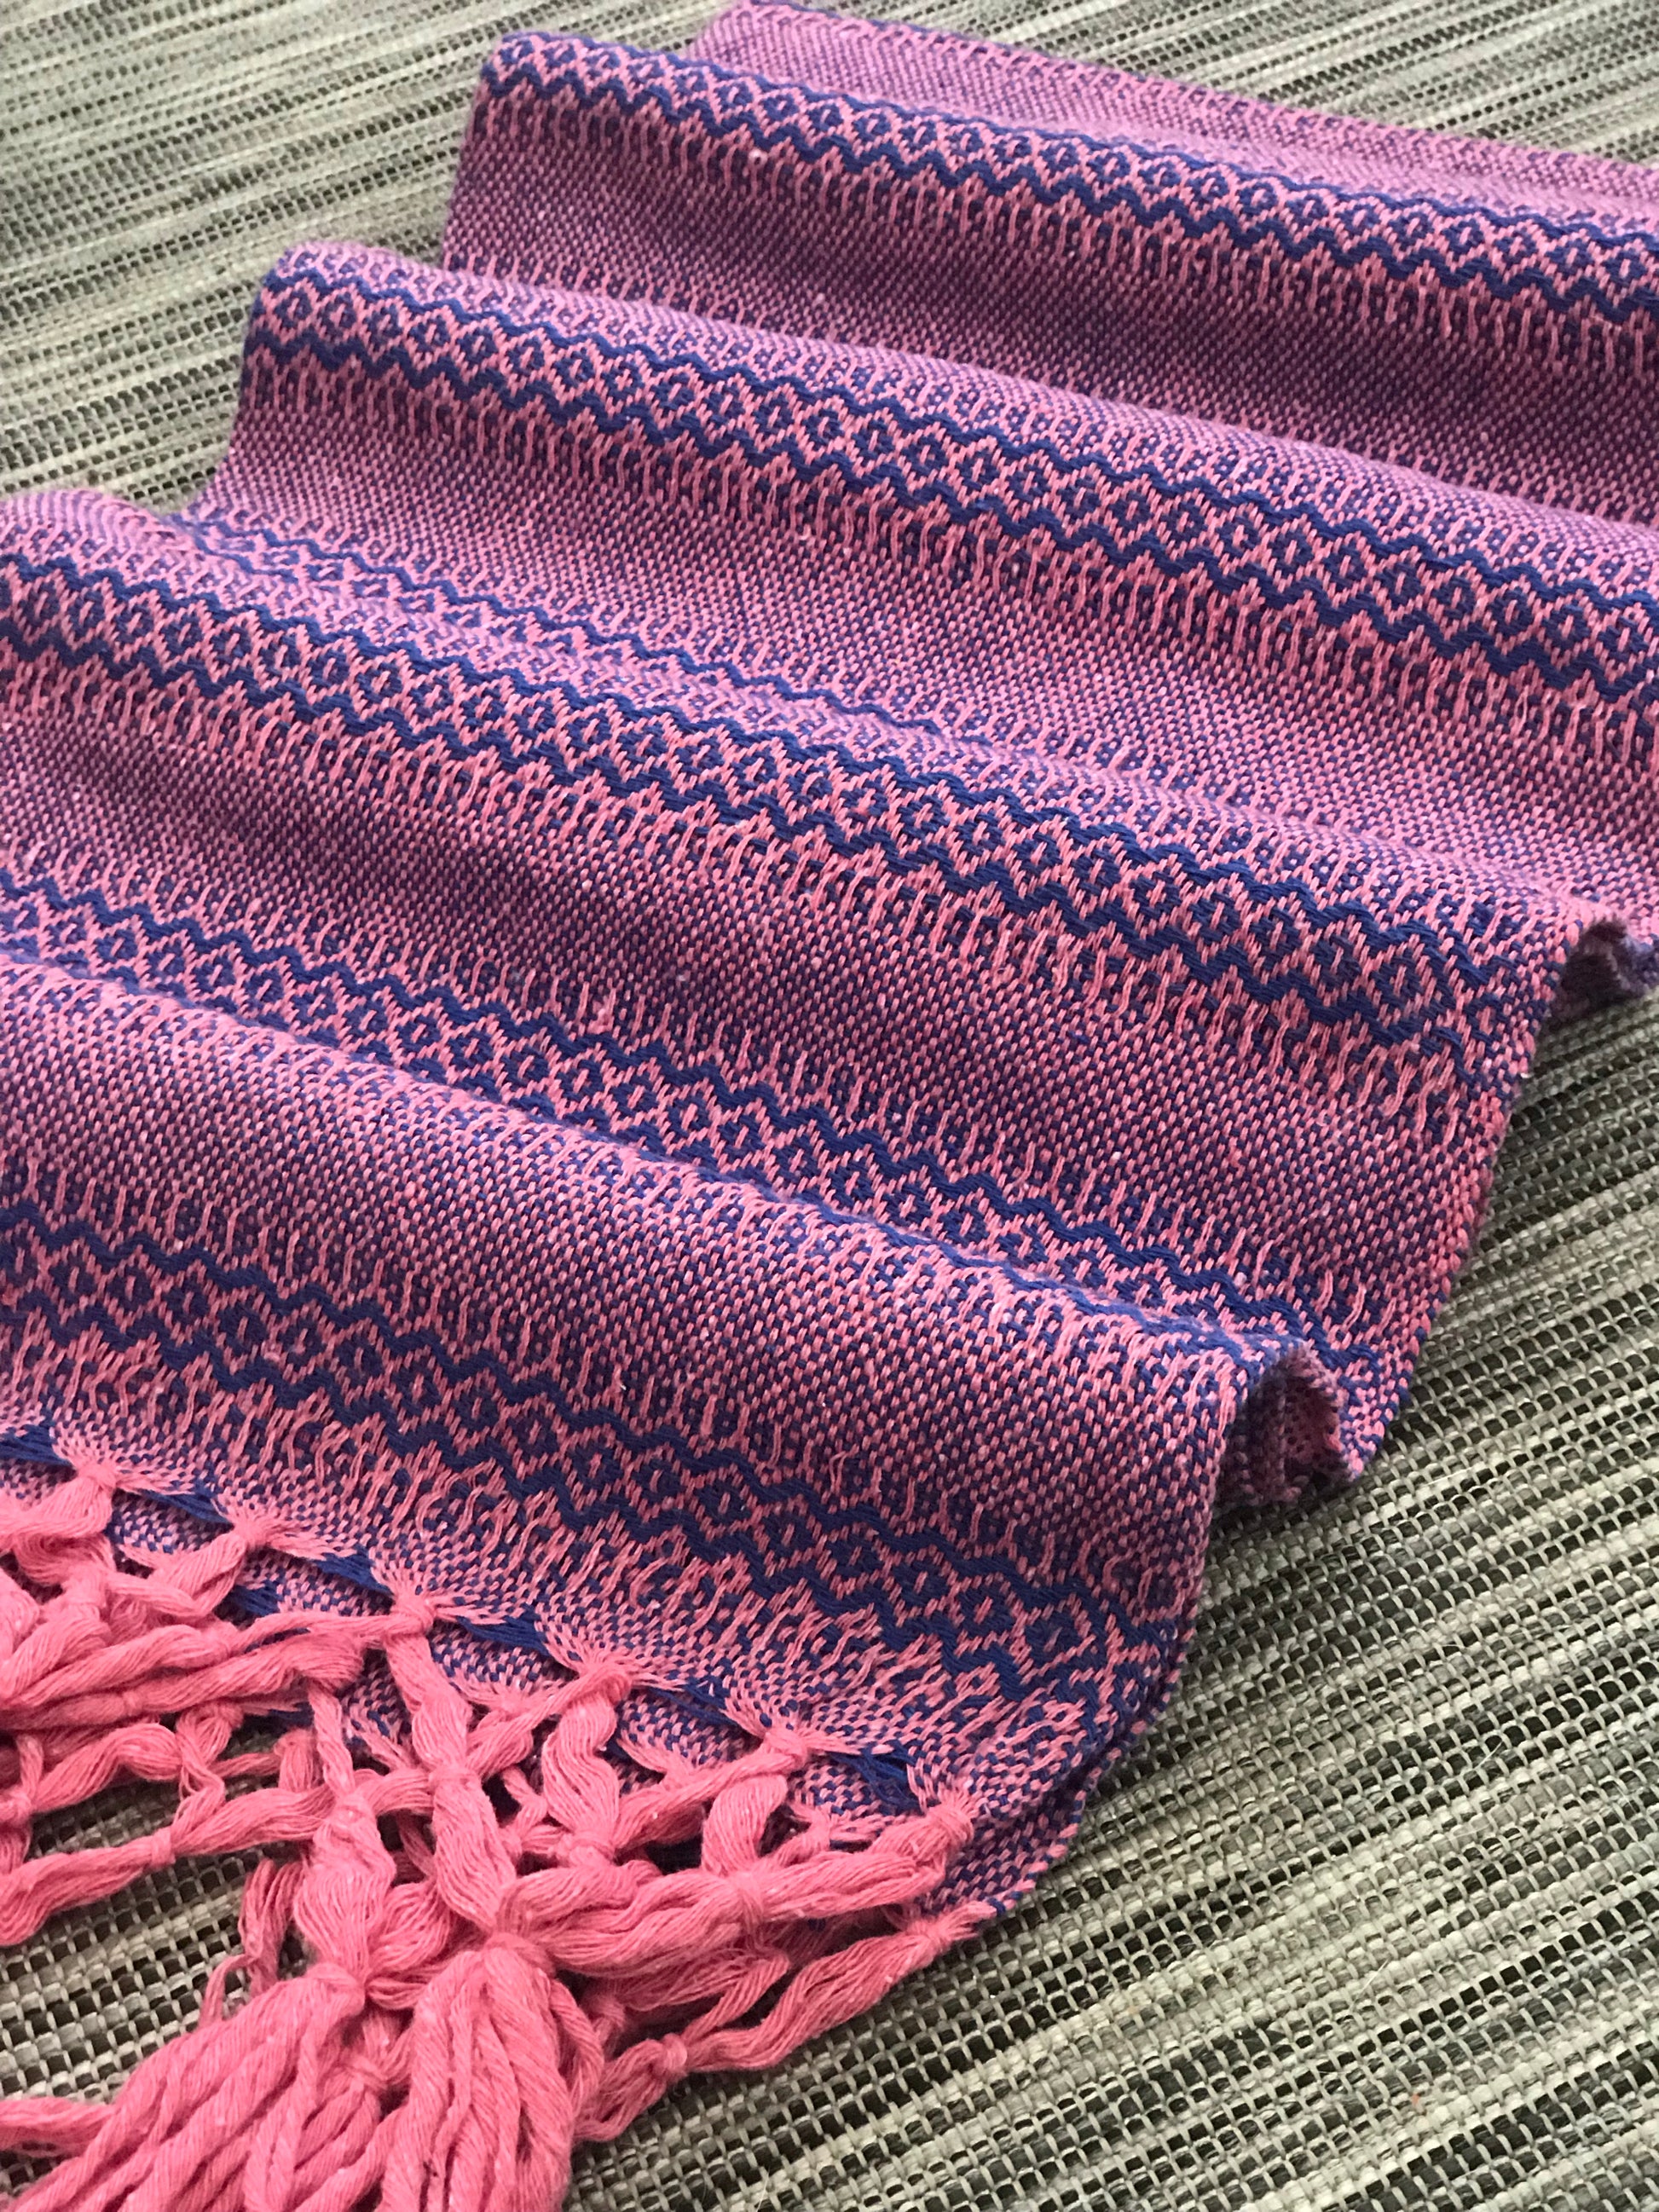 UNIQUE PIECE Mexican Rebozo Shawl - Love is in the Air - Lola My Love